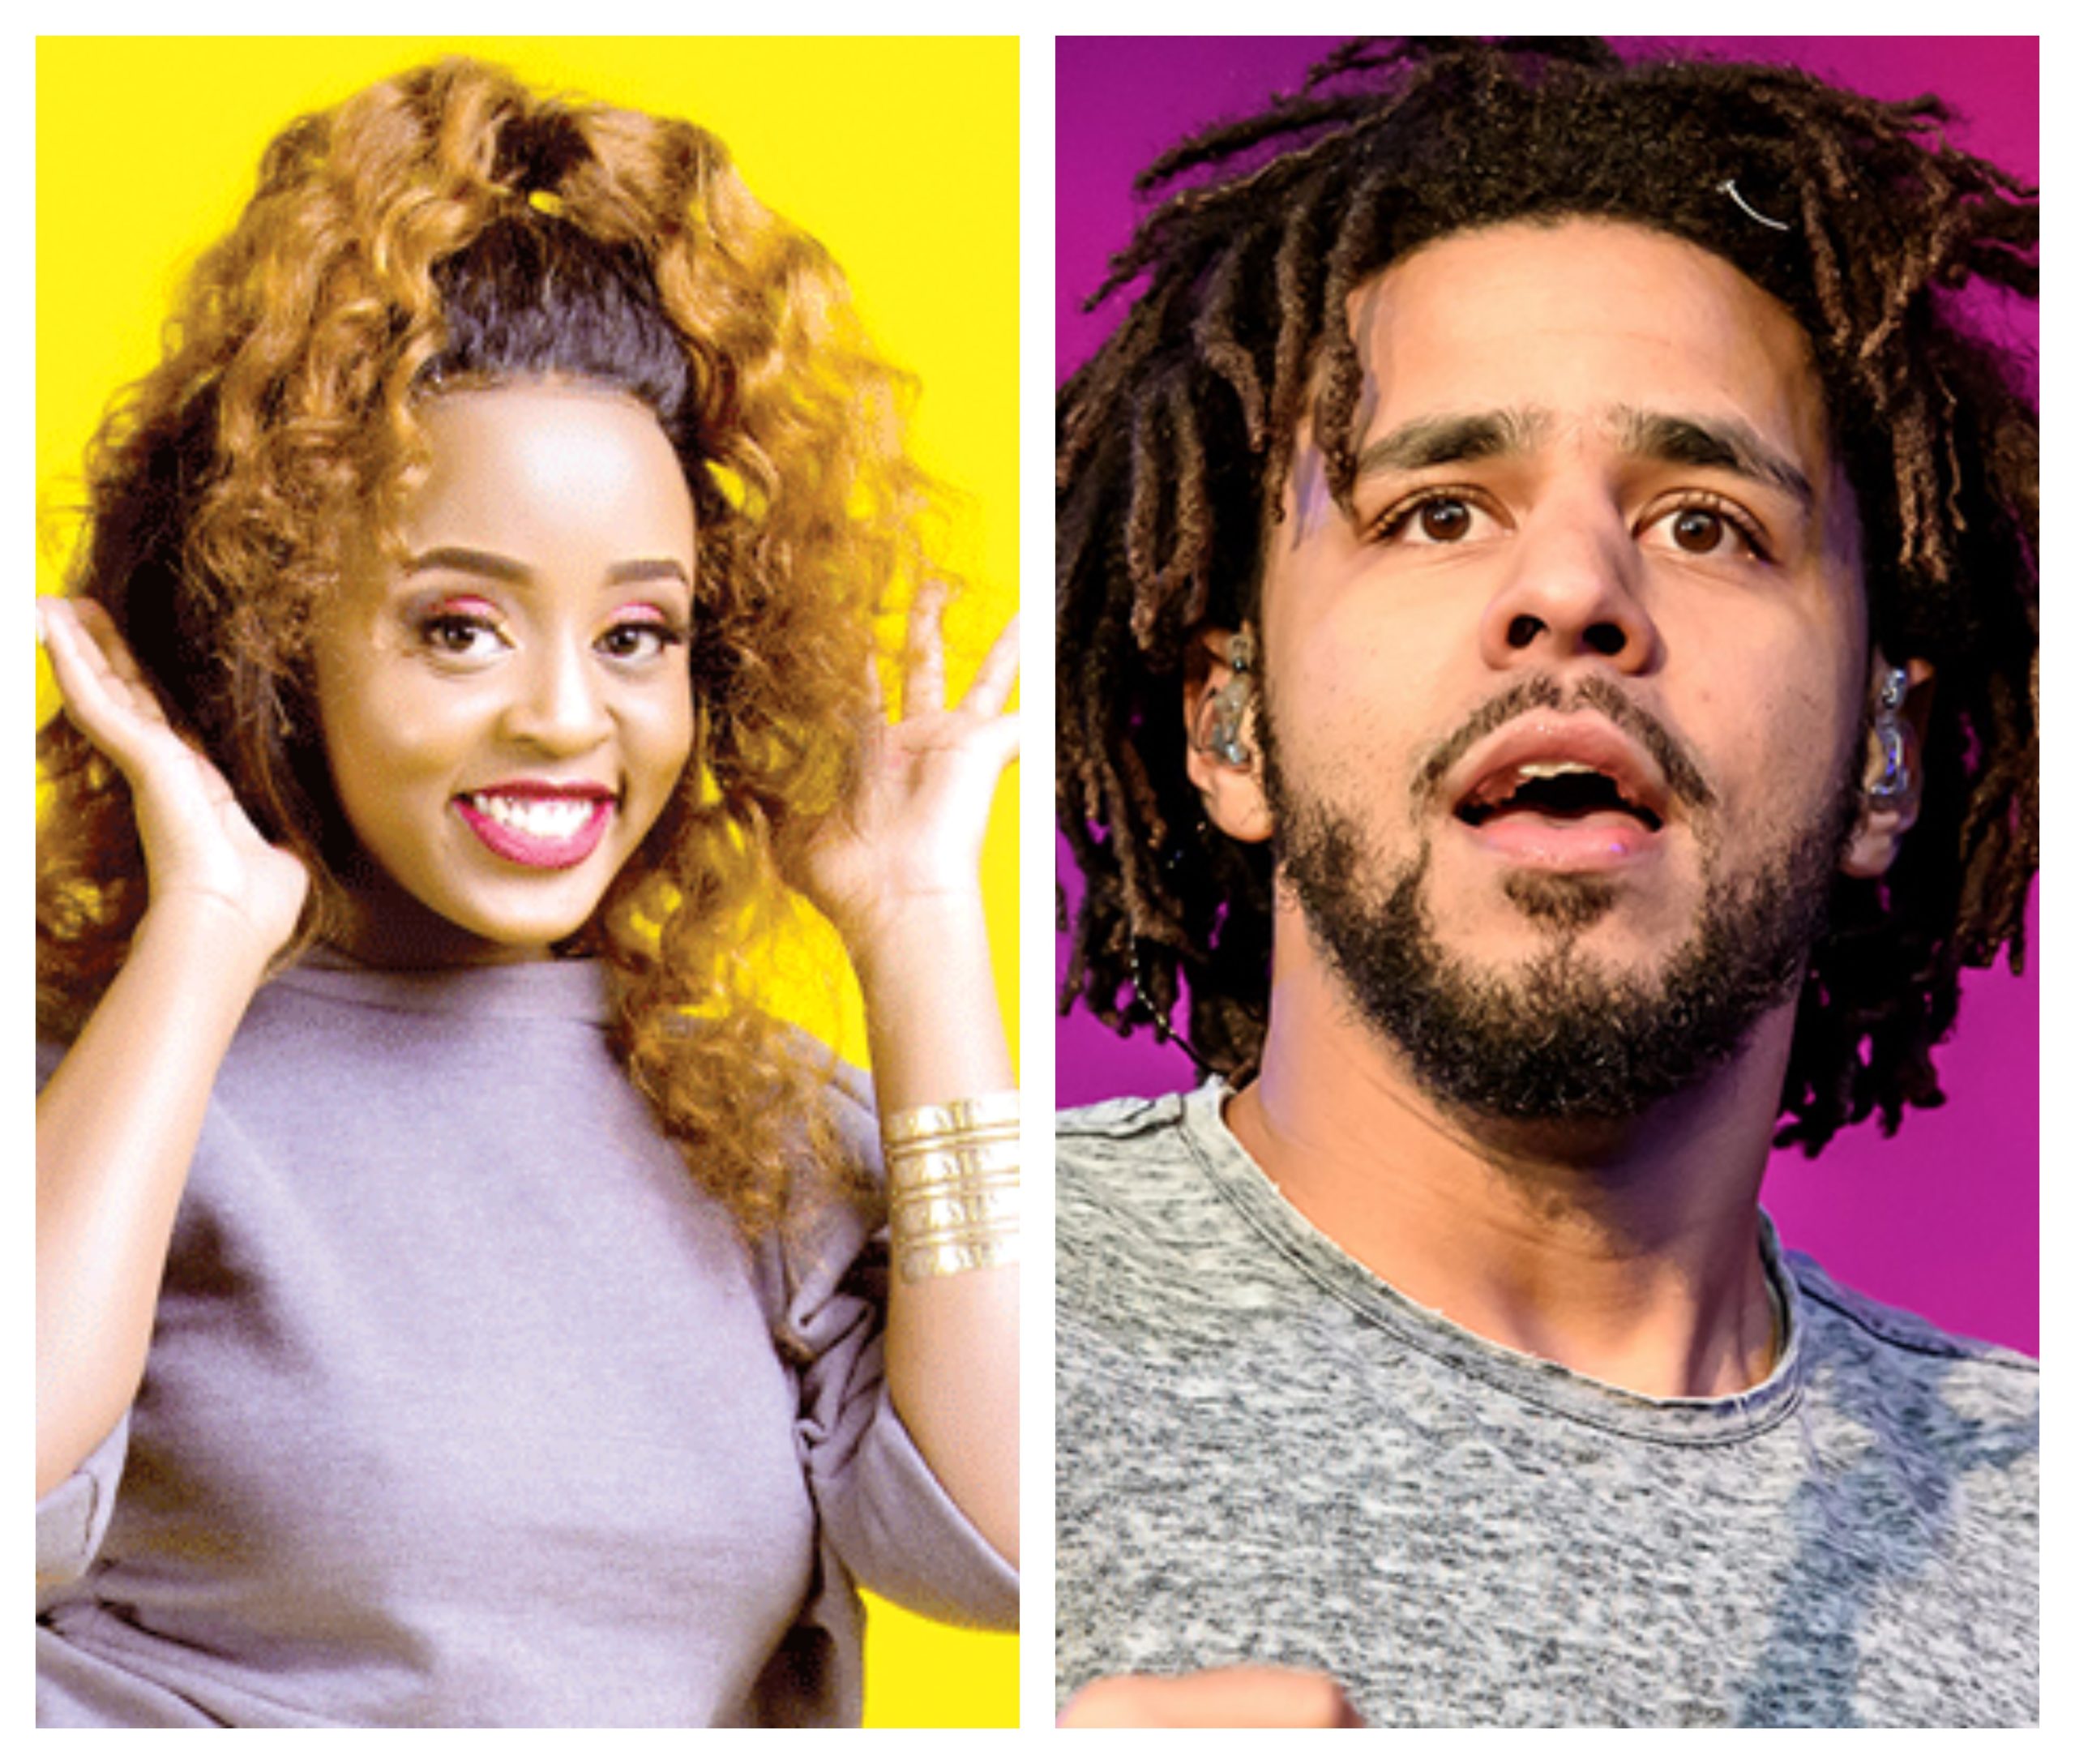 Nadia Mukami trolled for chasing clout, by using American rapper, J Cole as bait